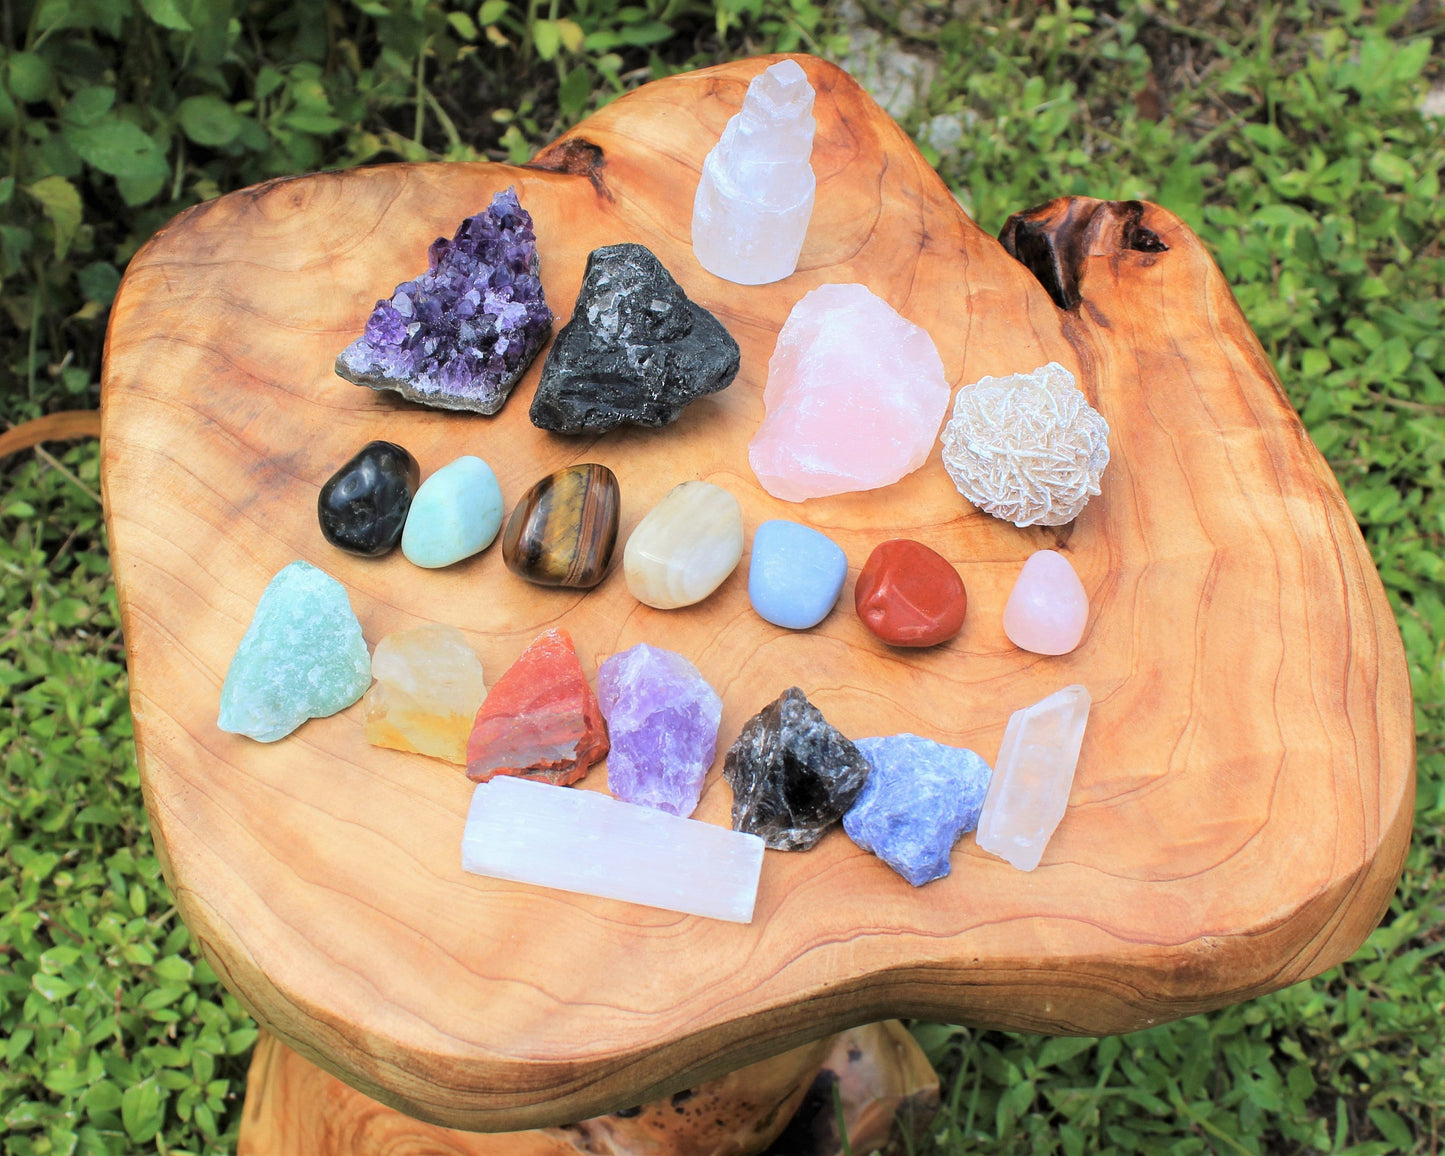 20 Pieces Healing Crystals And Stones Kit